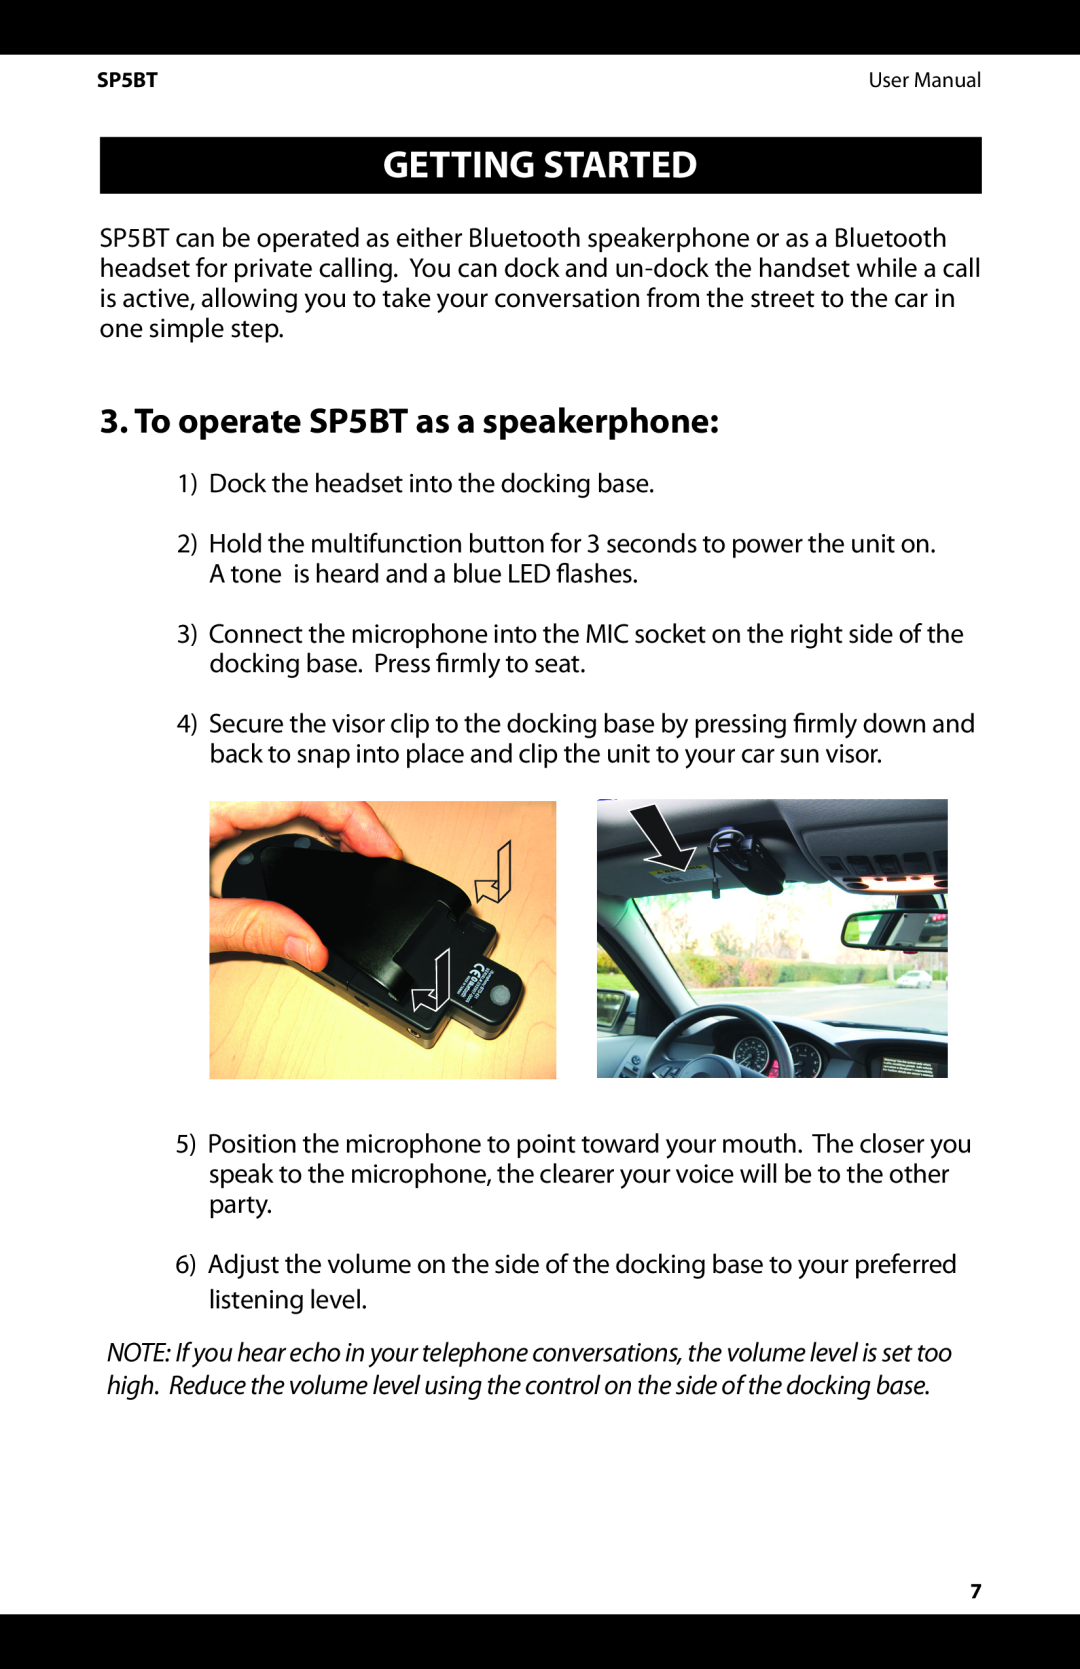 iSymphony user manual Getting Started, To operate SP5BT as a speakerphone 